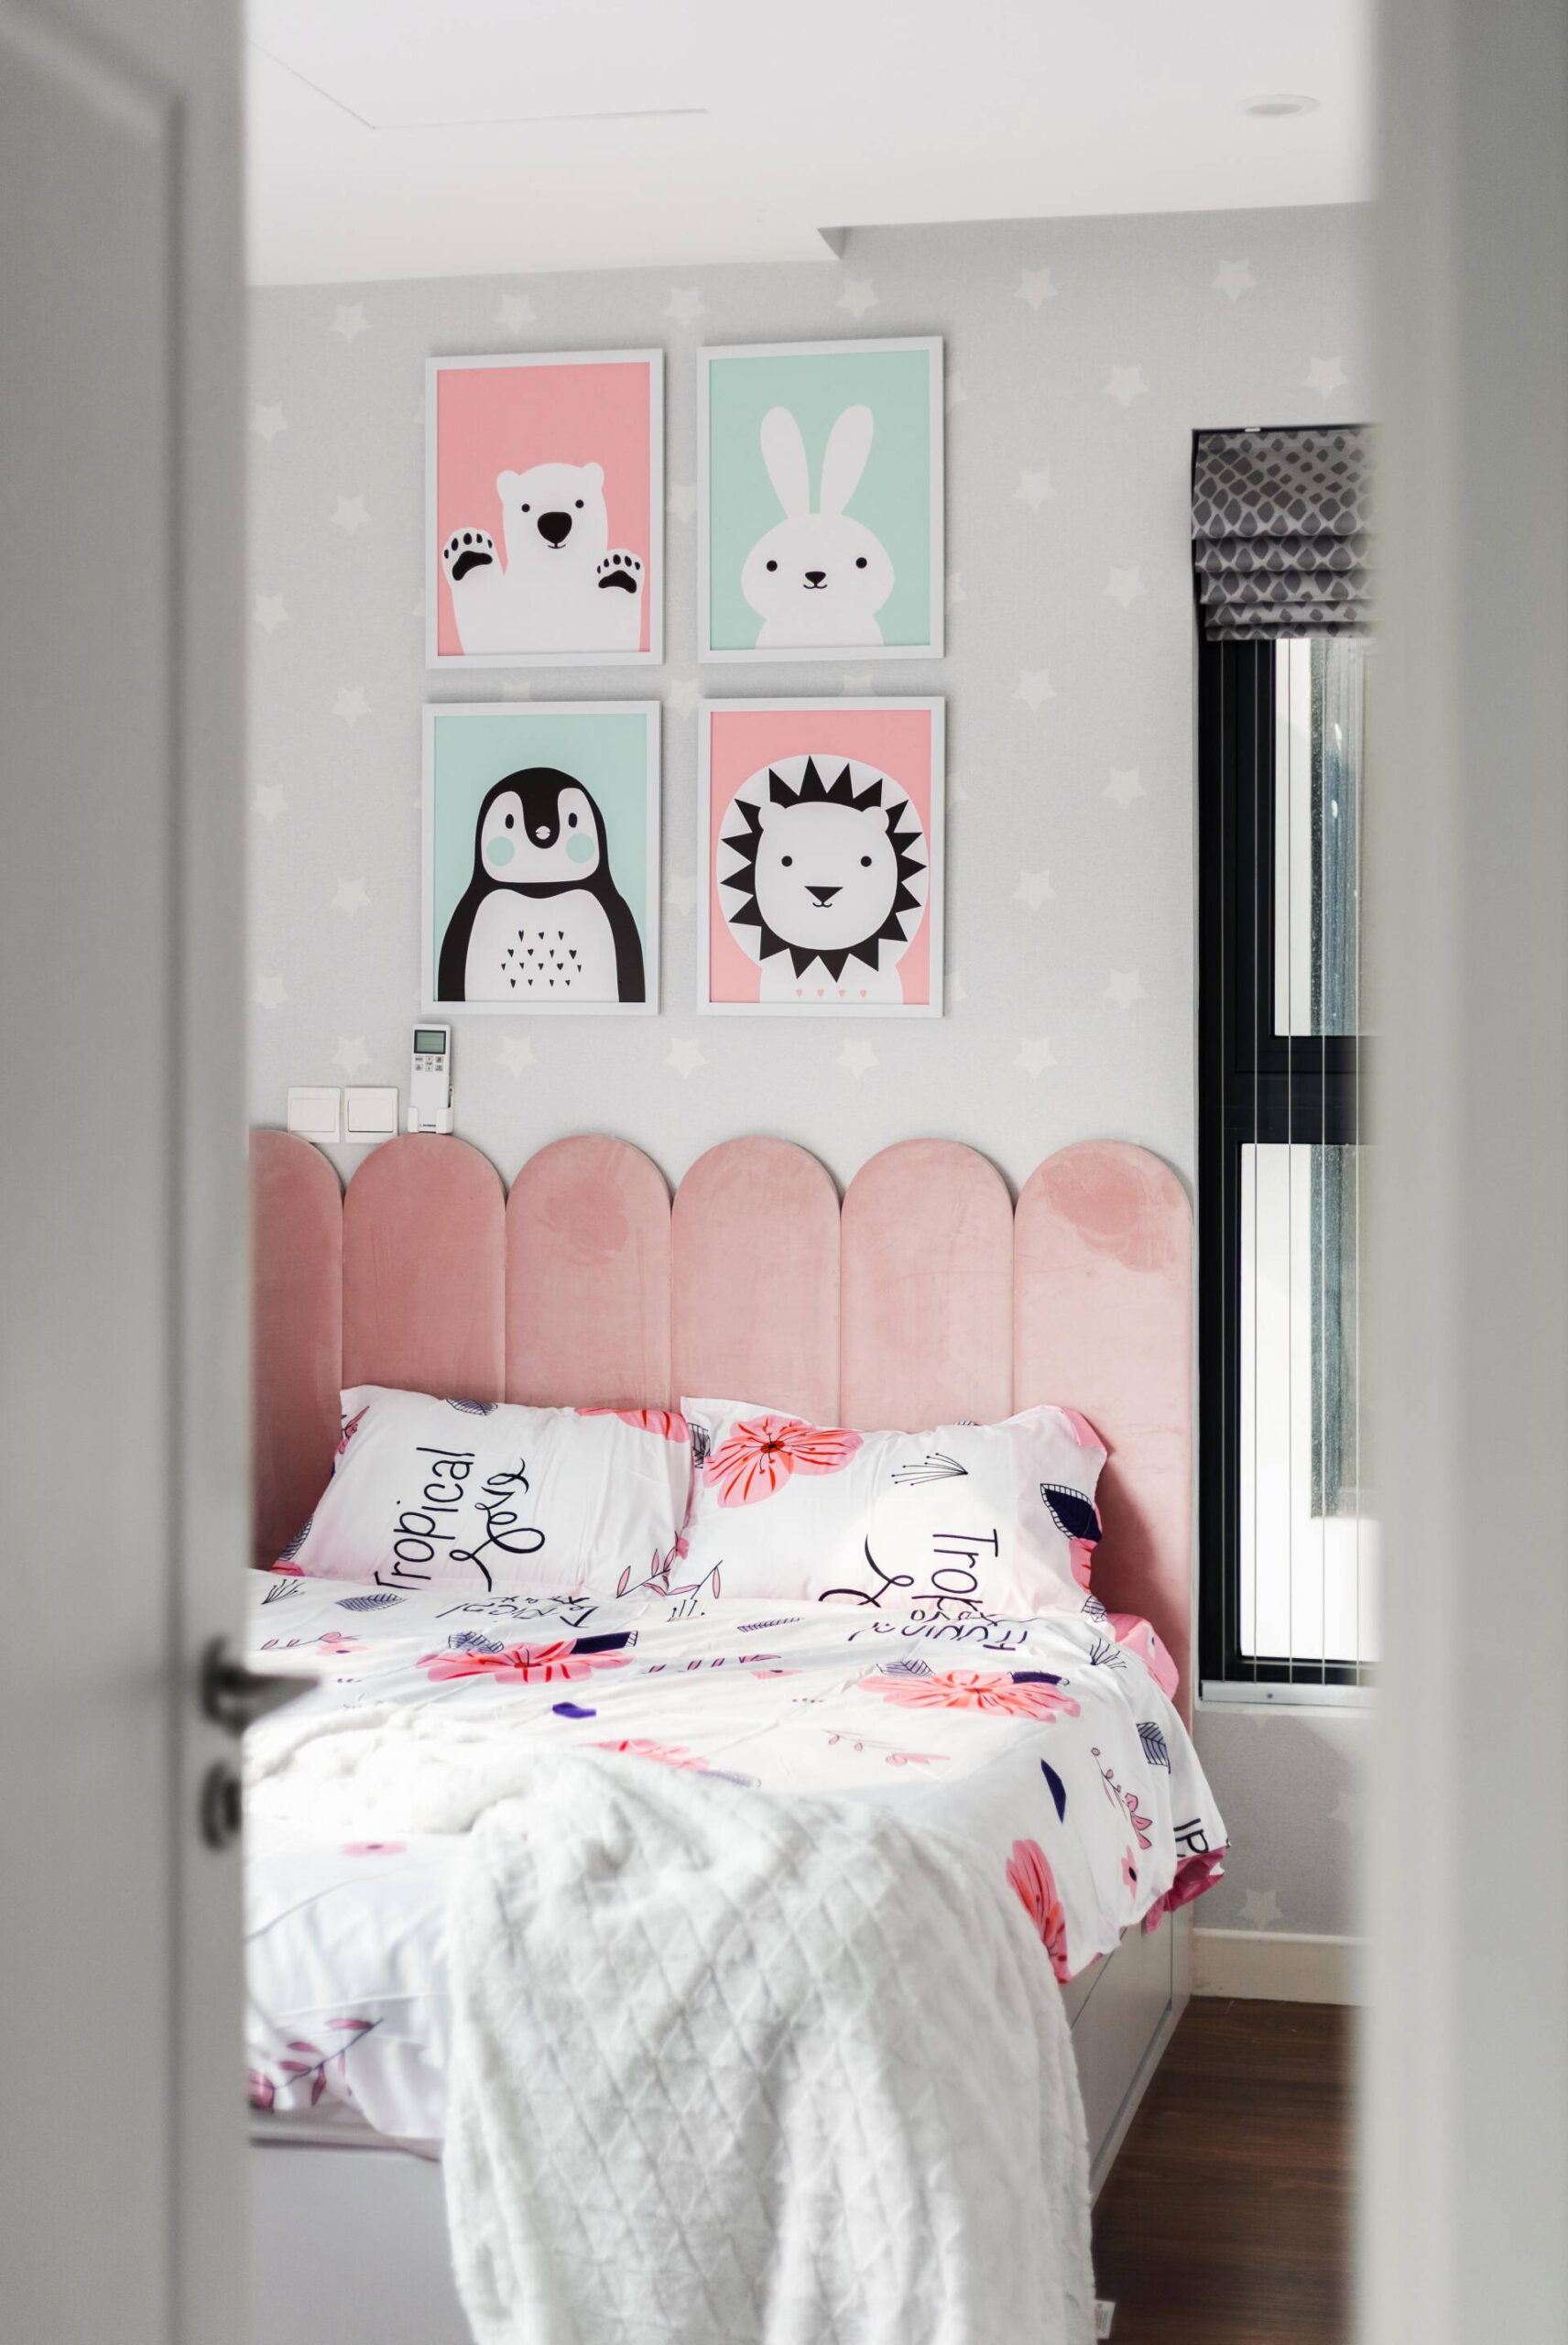 A lovely animal-shaped headboard adorns the little girl's private space.